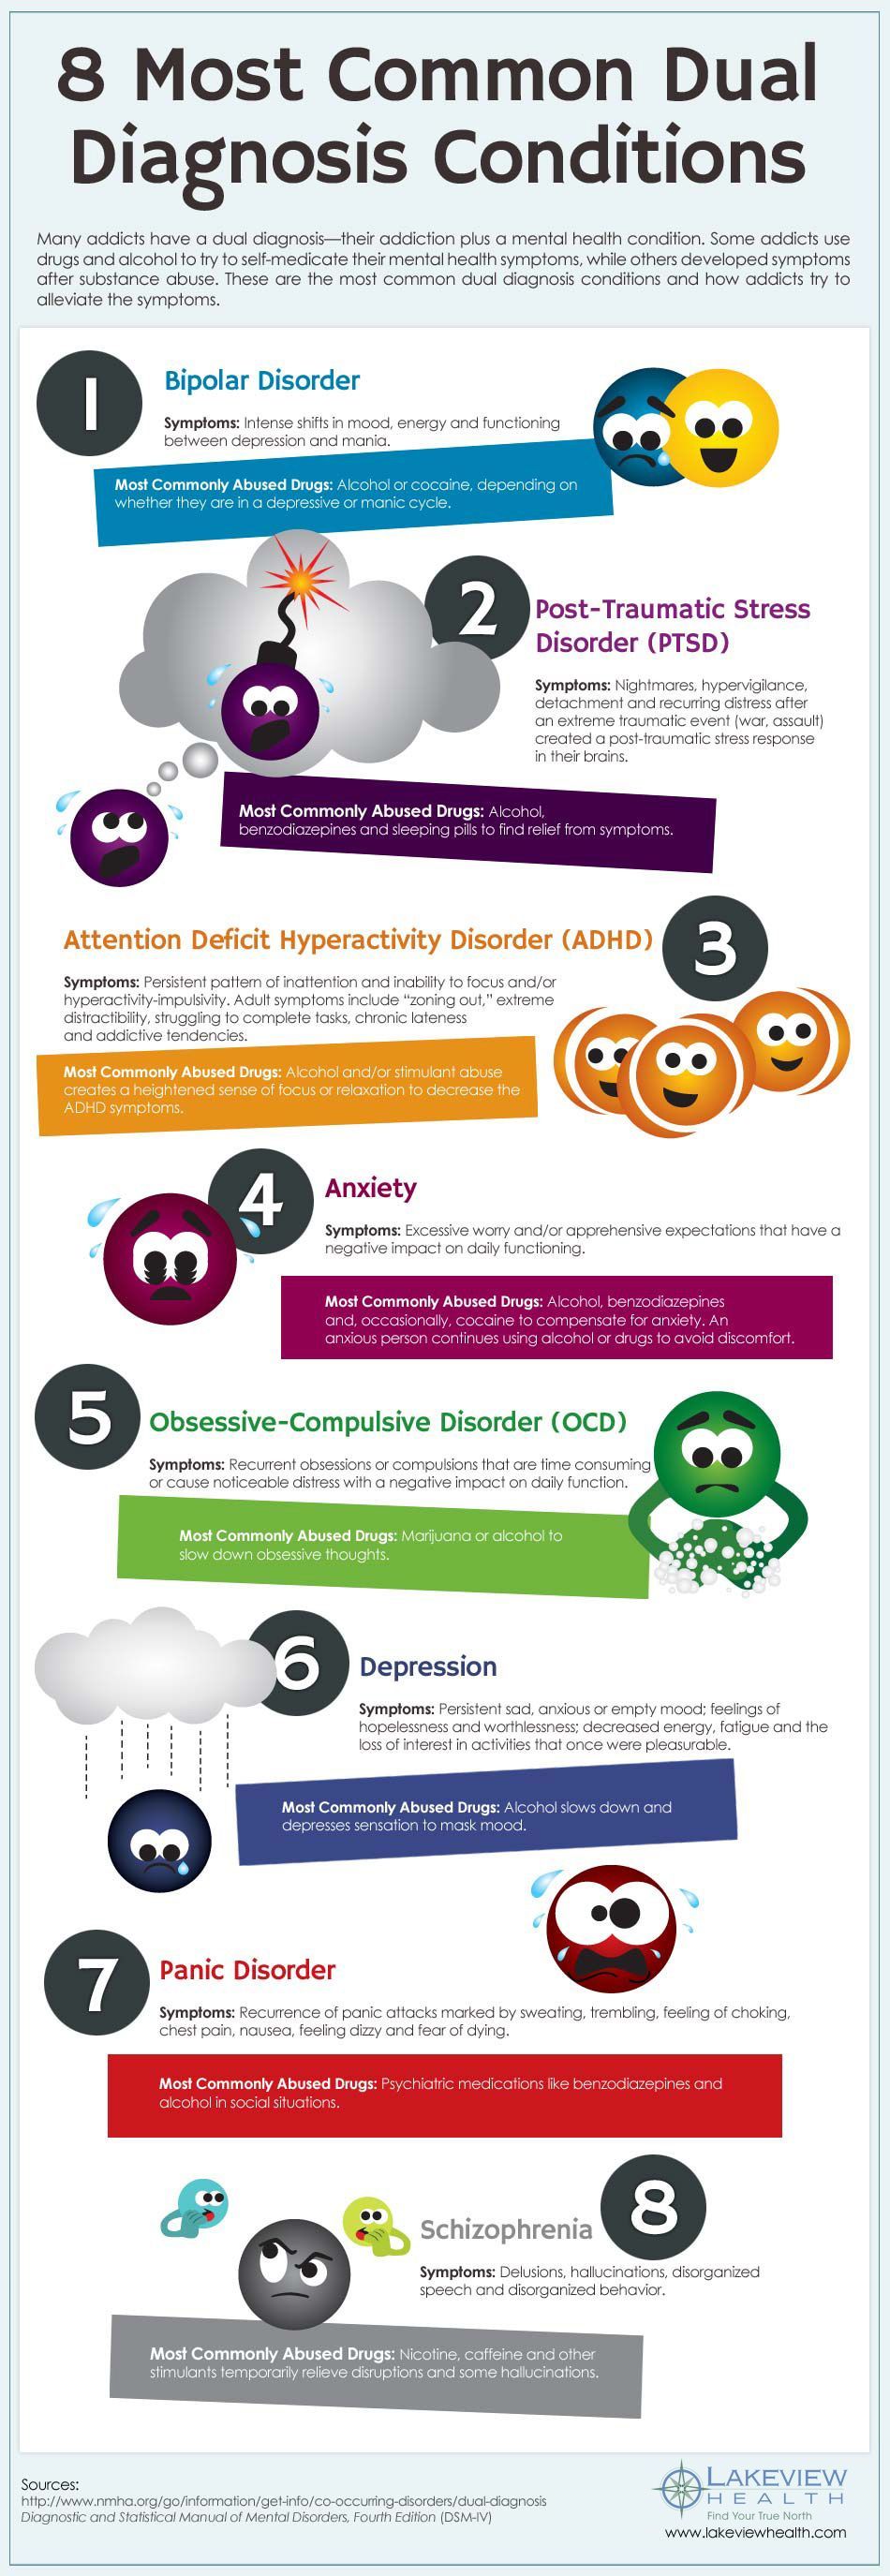 8 most common dual diagnosis disorders infographic